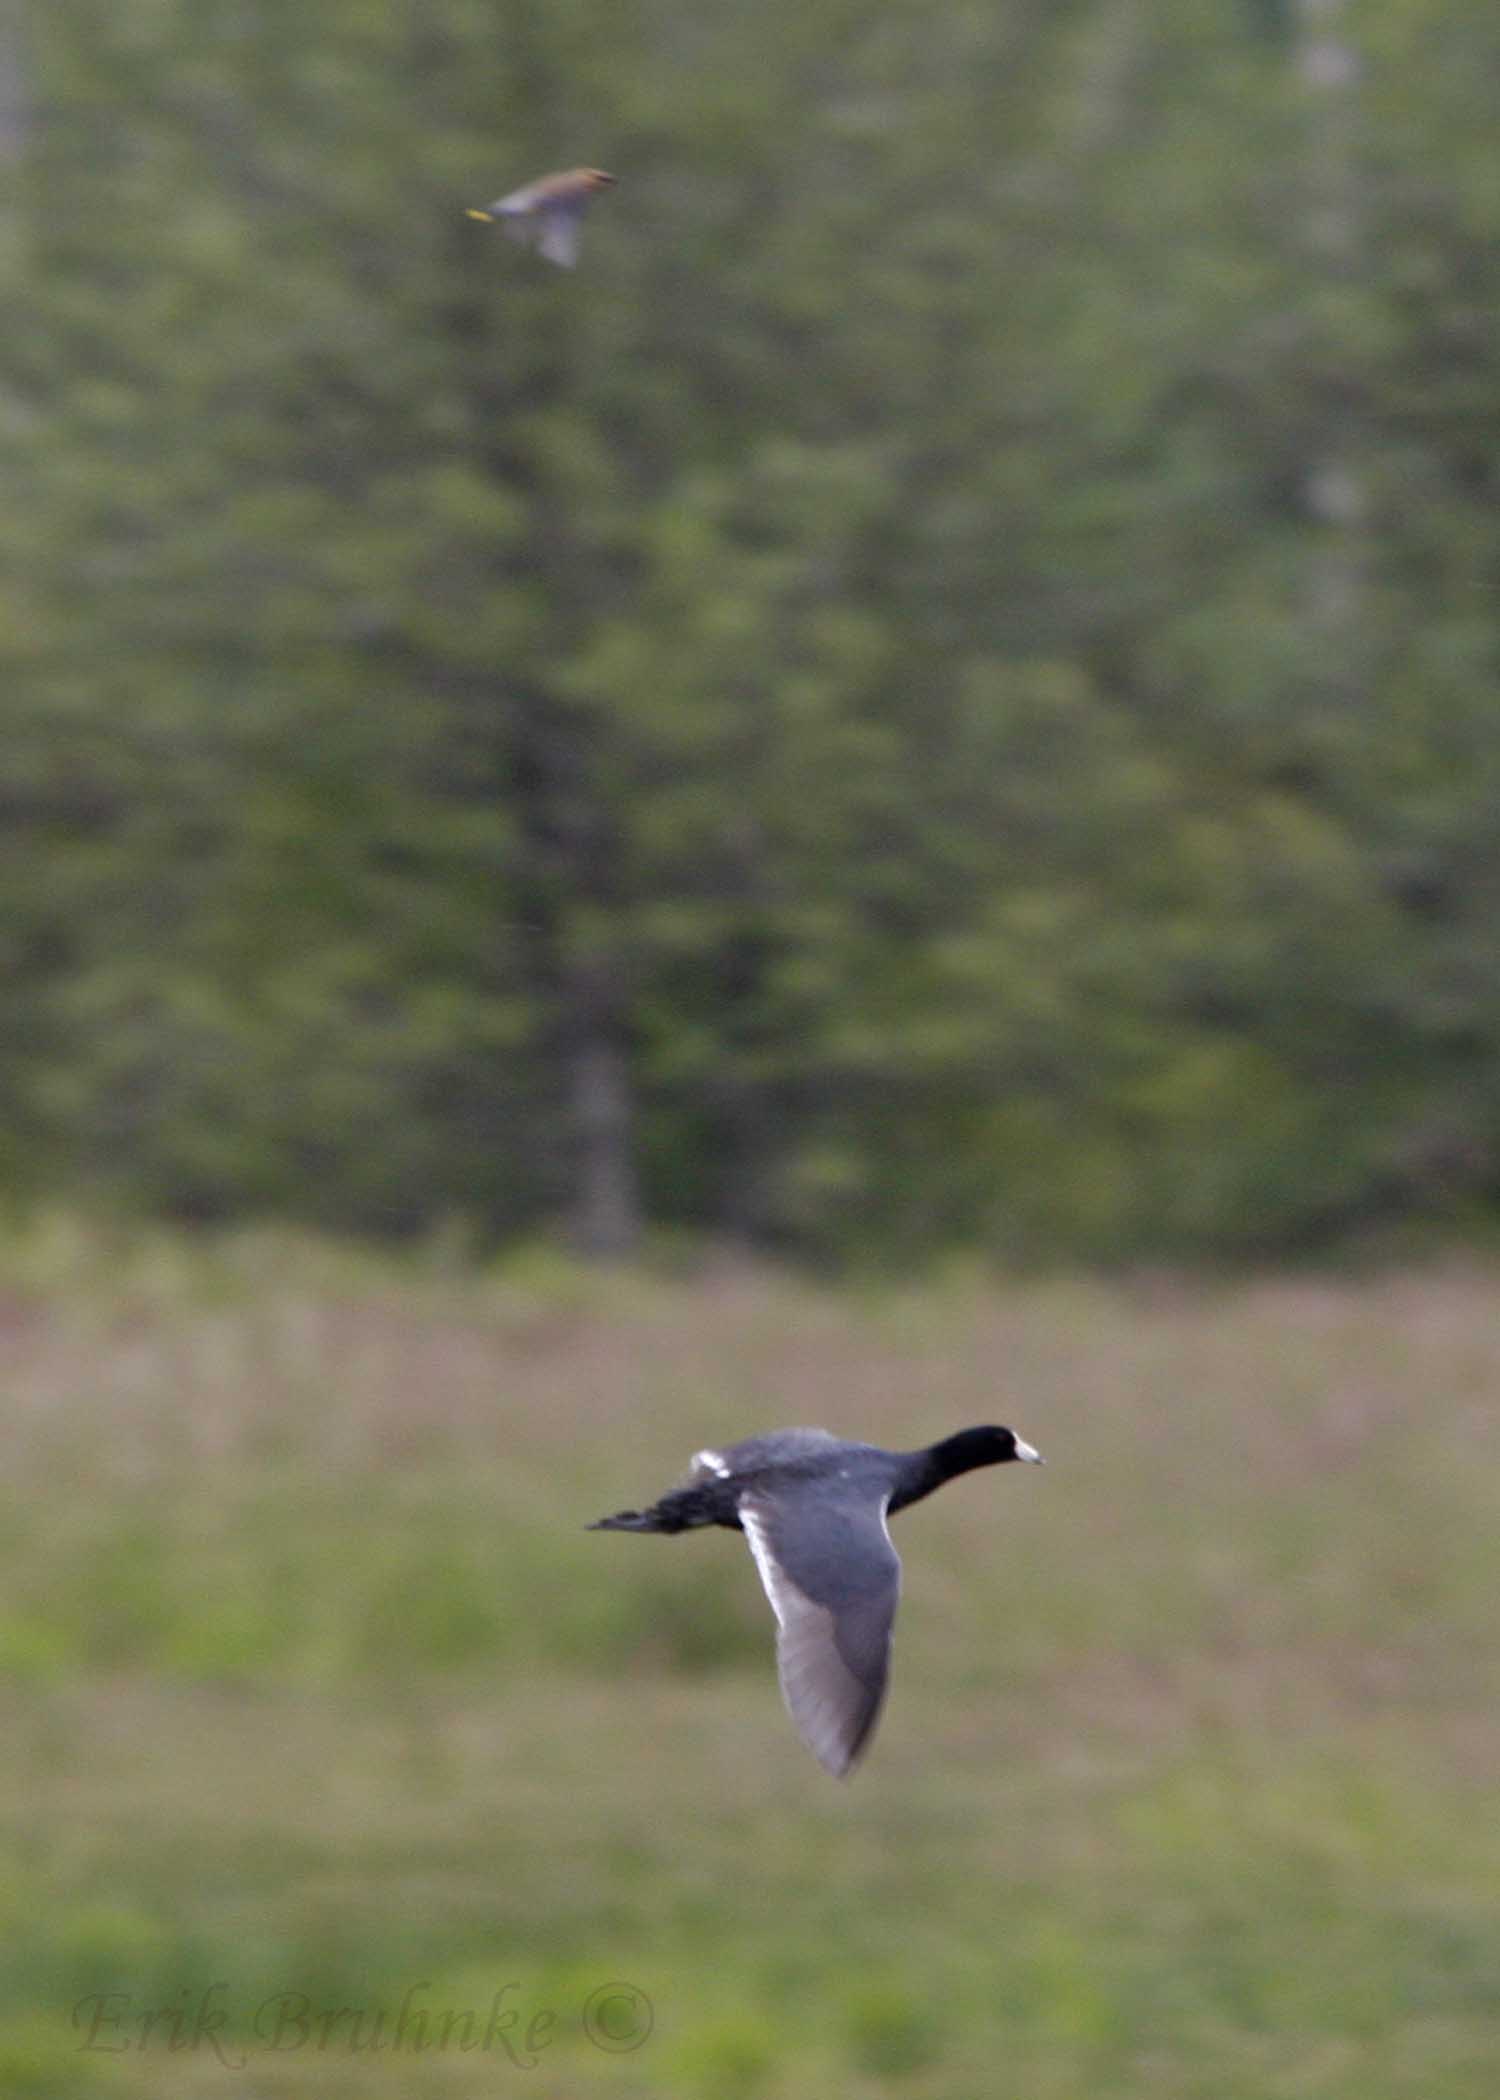 American Coot in flight, with Cedar Waxwing in background